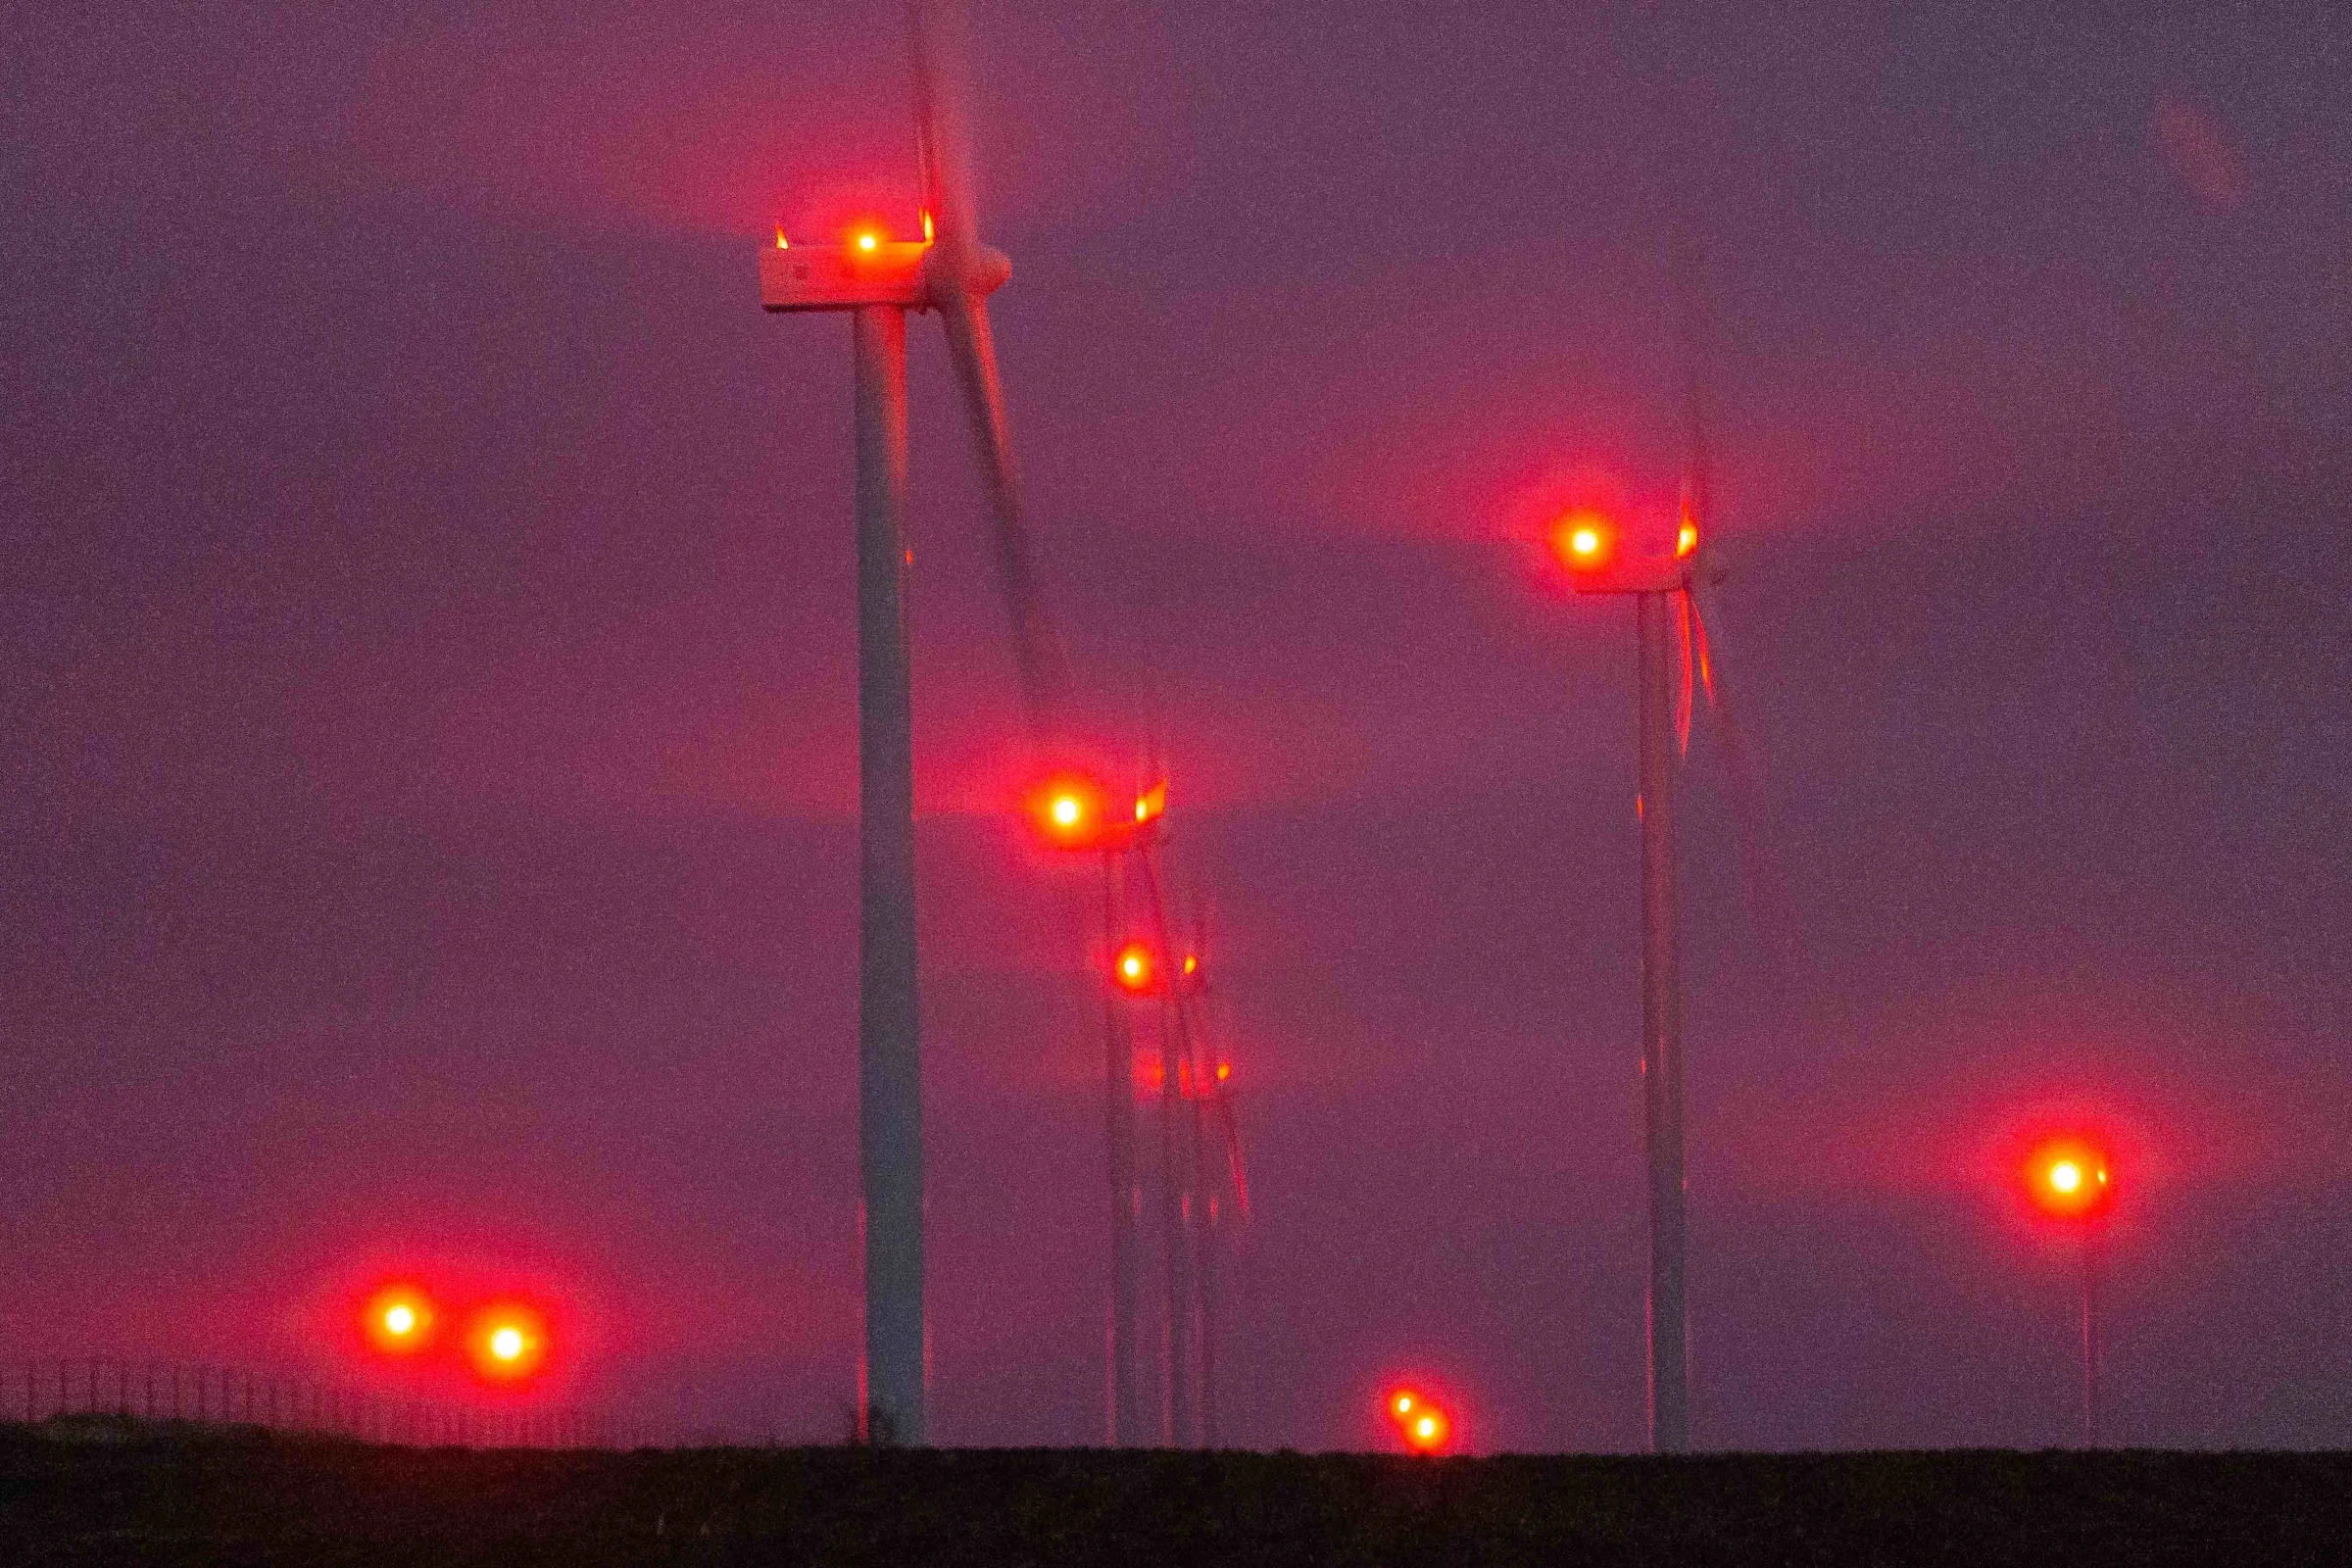 Red lights on wind turbines in Allen County flash in unison Thursday night during an overcast sky. A bill in the Kansas legislation would make these lights less intrusive by requiring light mitigation technology on new and existing wind farms.